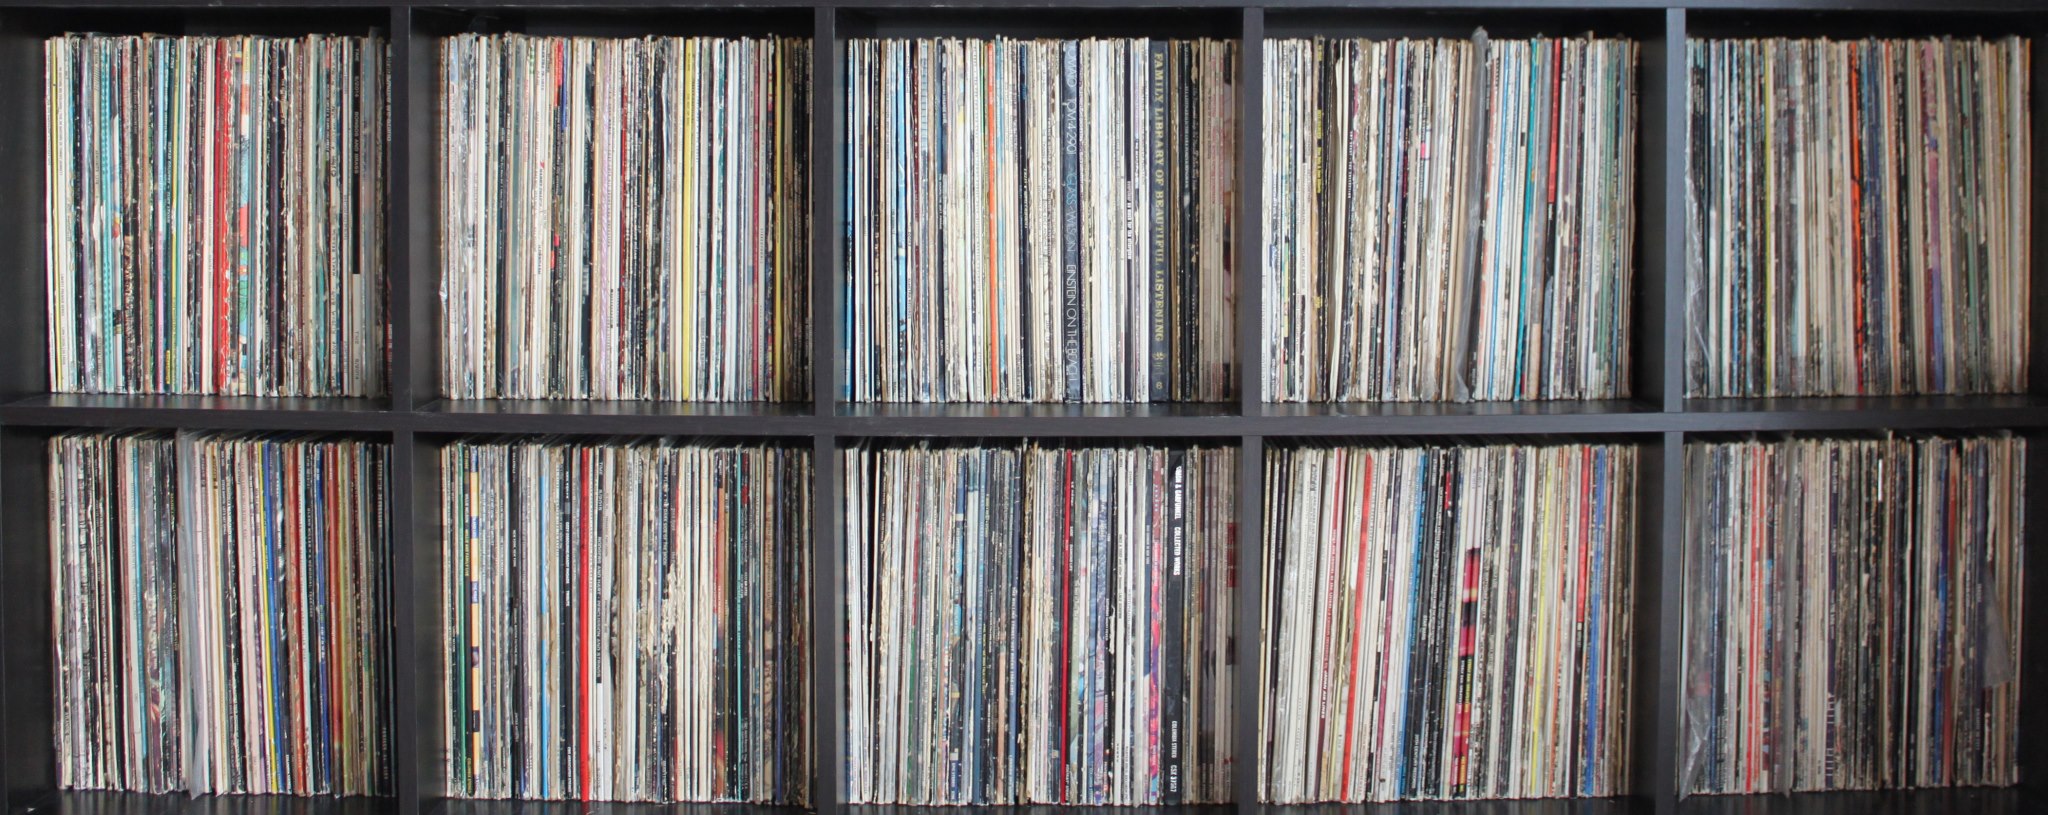 My Record Collection